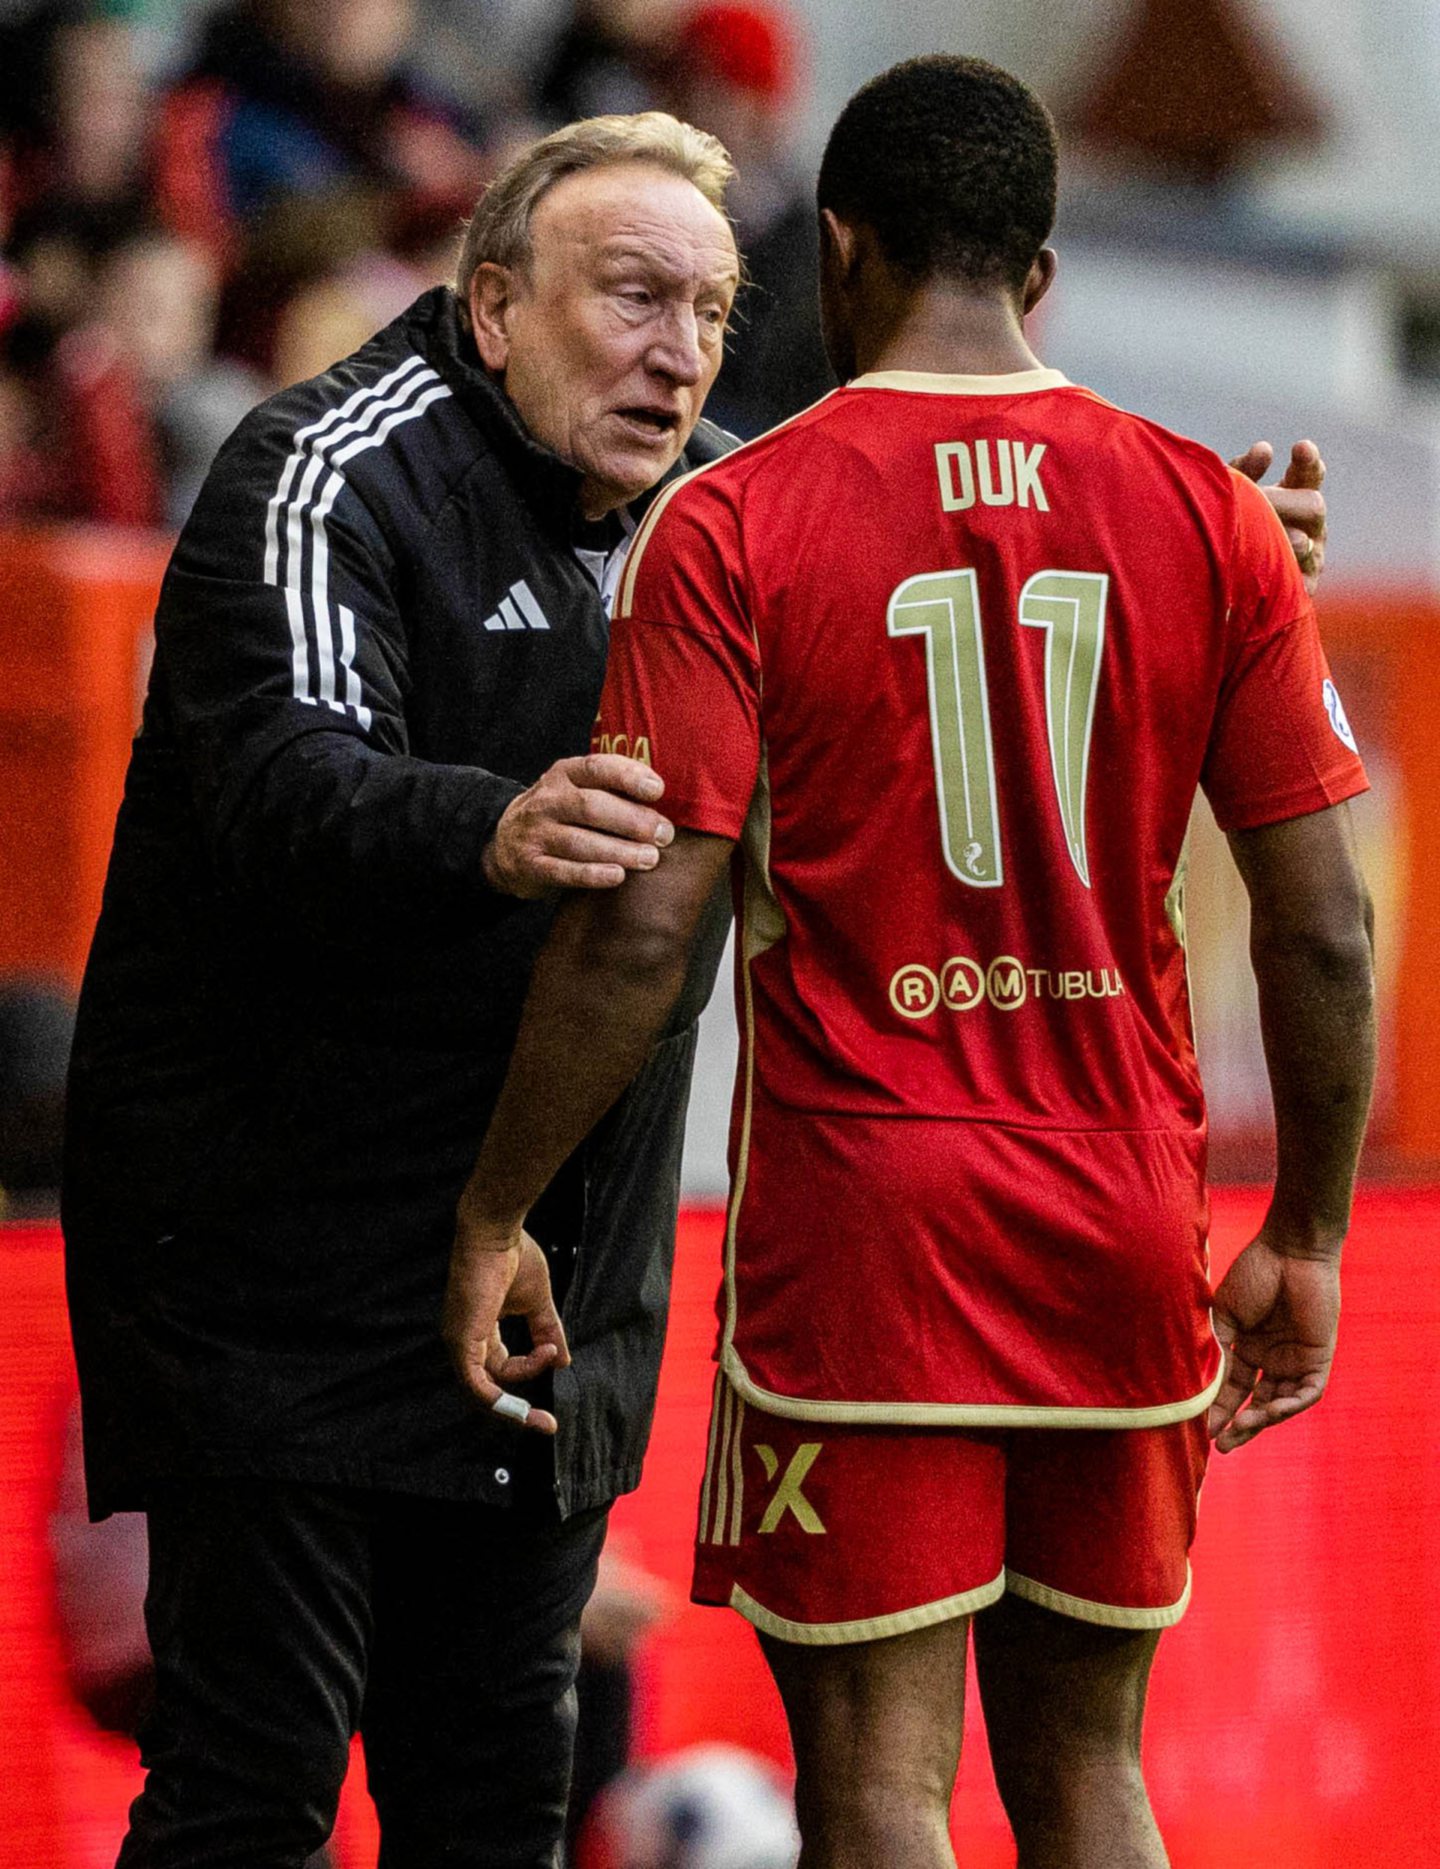 Aberdeen interim manager Neil Warnock with Duk during the Scottish Cup defeat of Bonnyrigg Rose. Image: SNS 